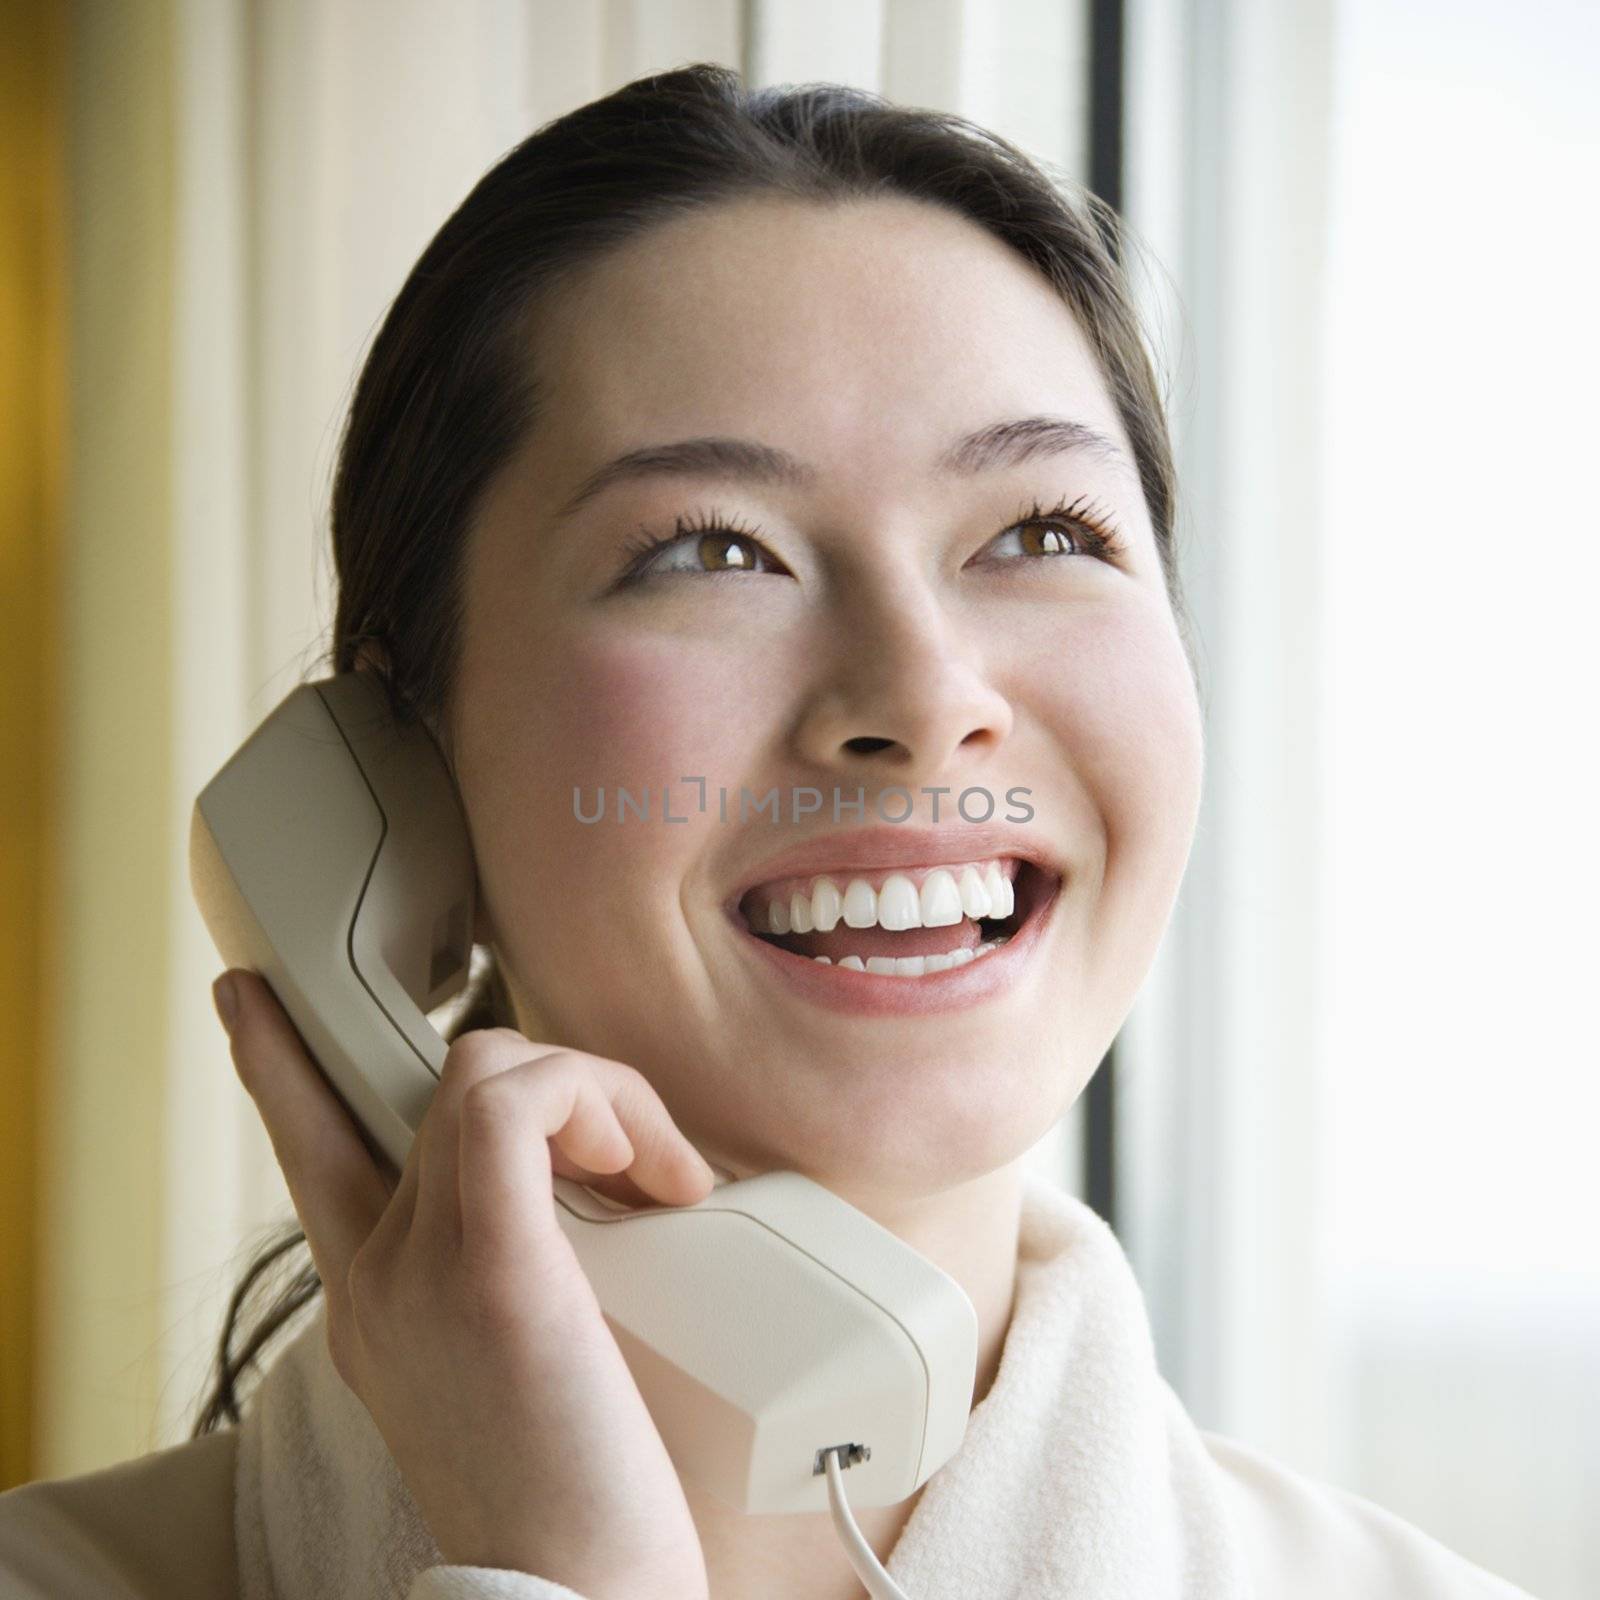 Taiwanese mid adult woman in bathrobe talking on phone and smiling.